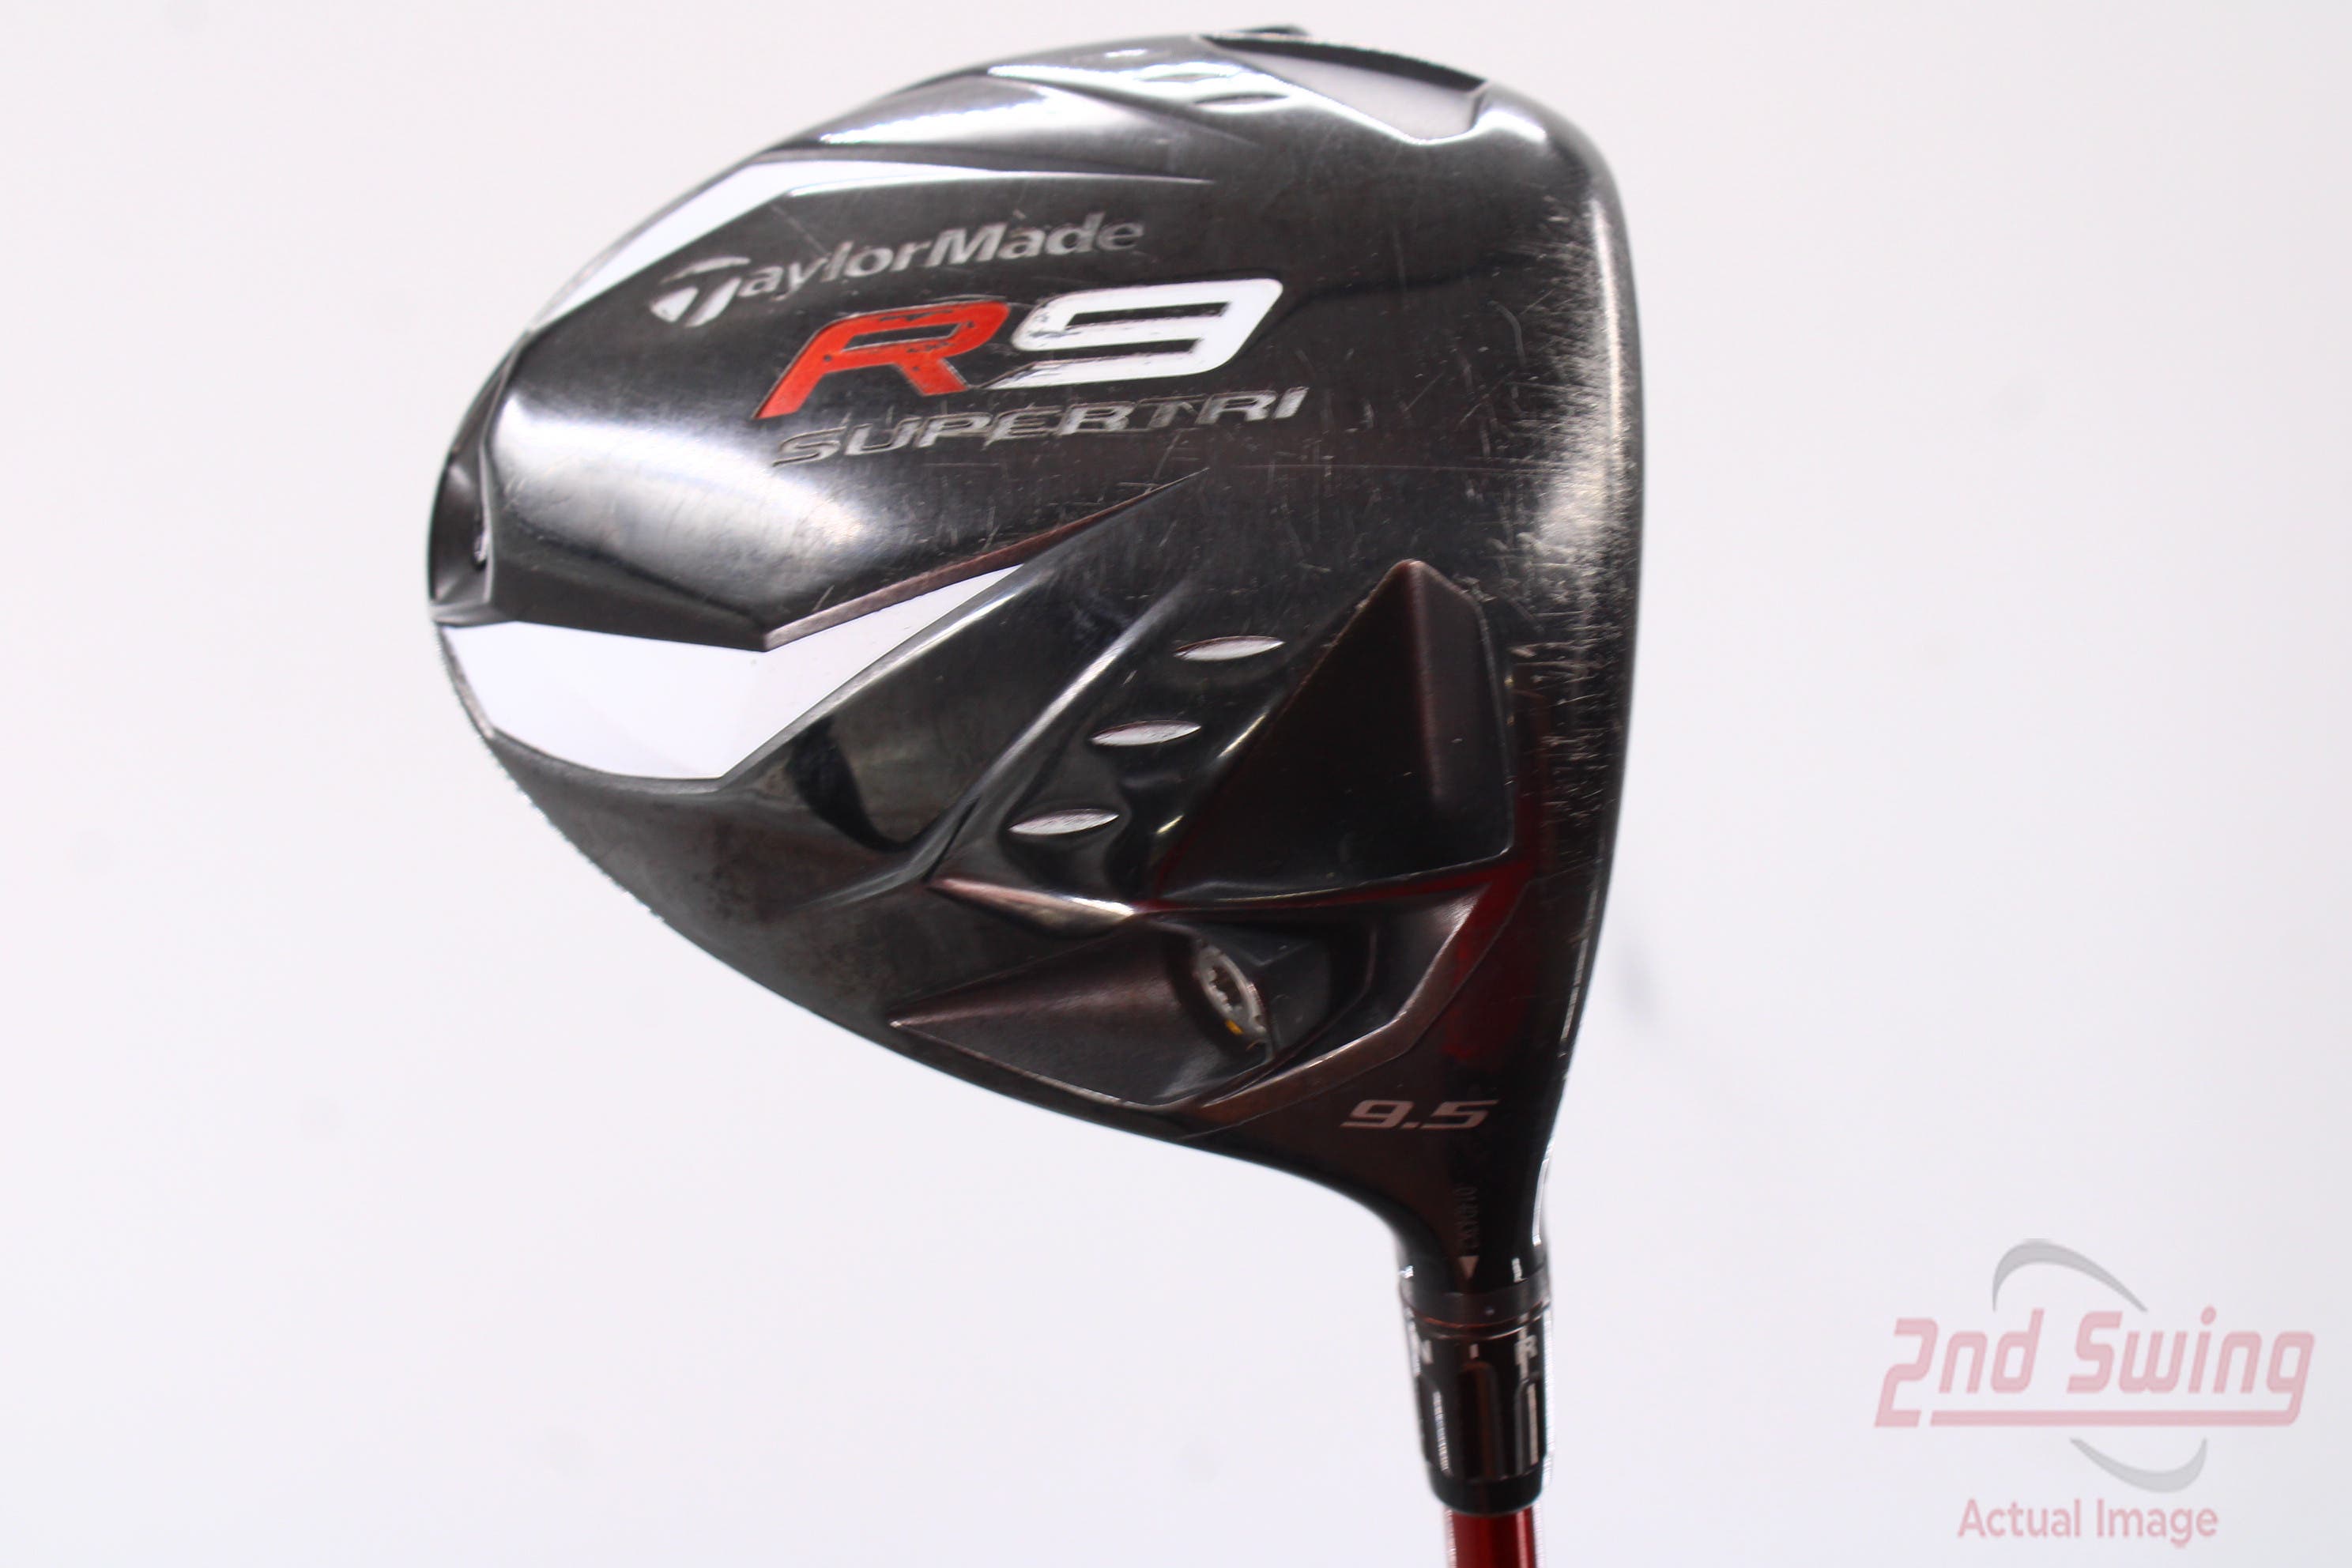 TaylorMade R9 SuperTri Driver (A-62331516892) | 2nd Swing Golf